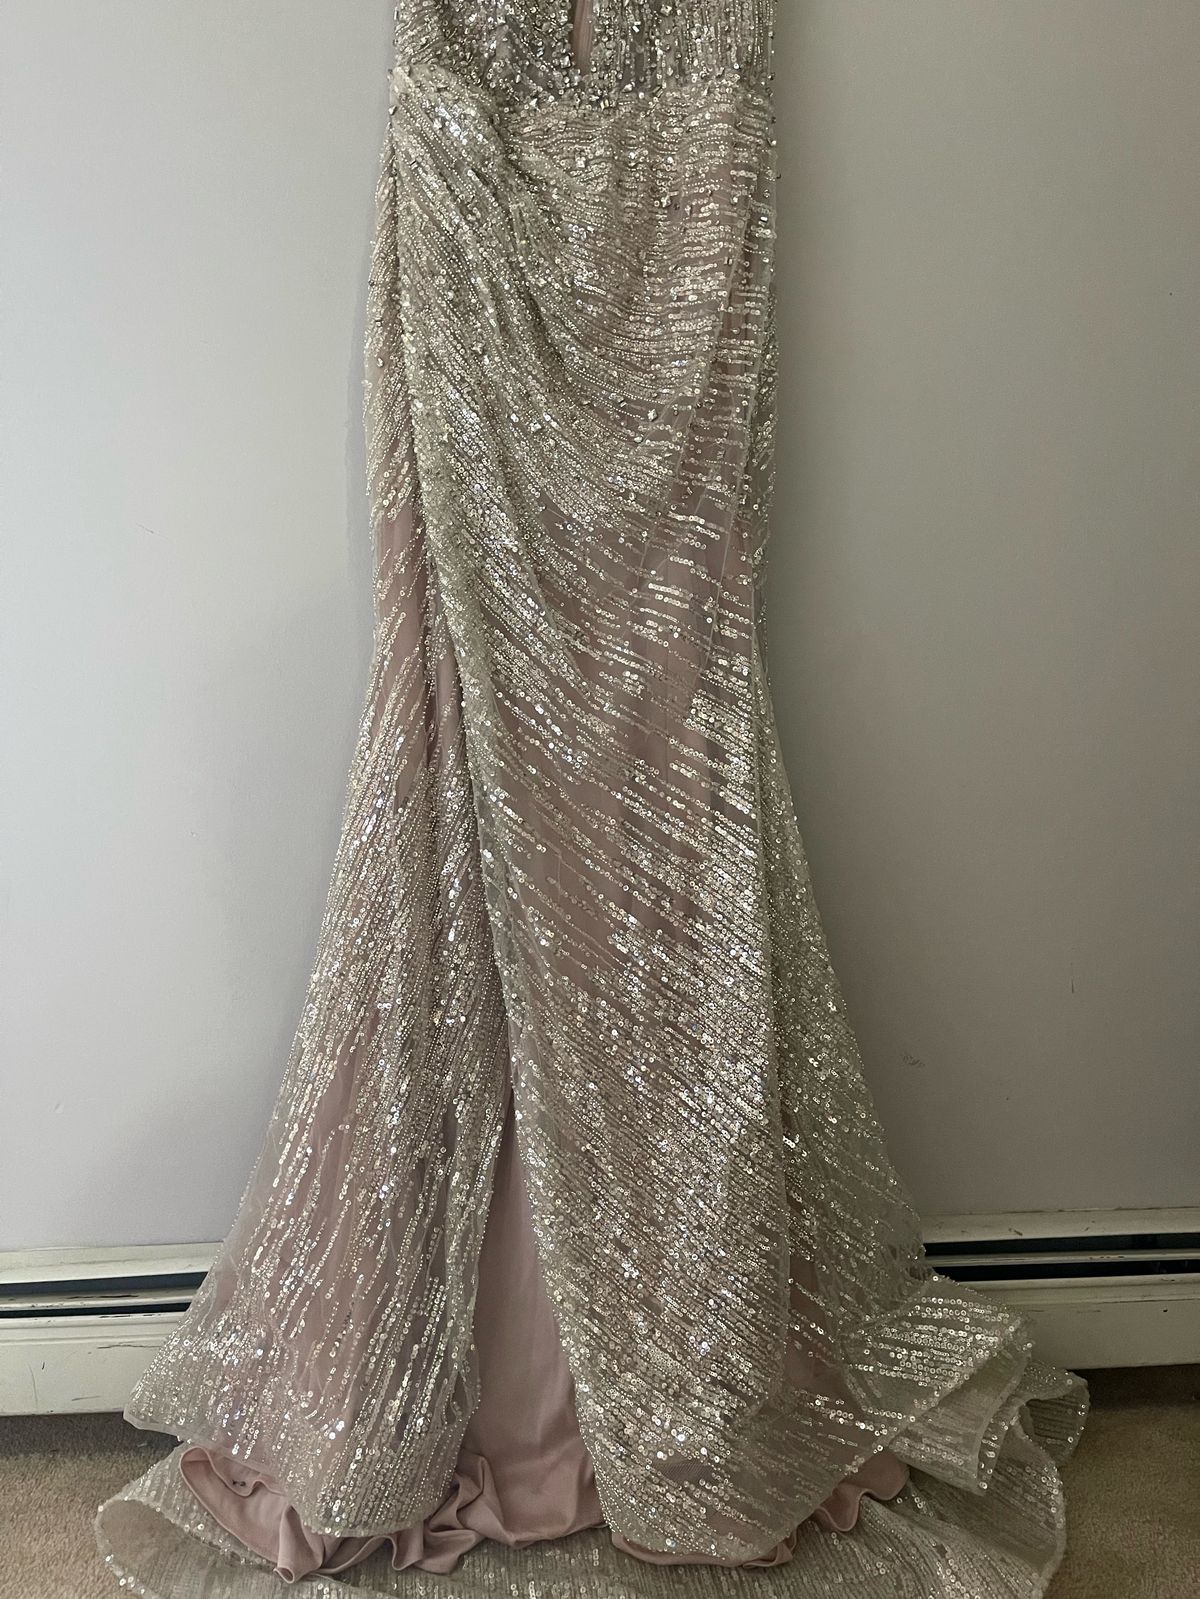 Style Custom-made 60190 pink undertones Nora’s Bridal NY Size 14 Prom Plunge Nude Mermaid Dress on Queenly